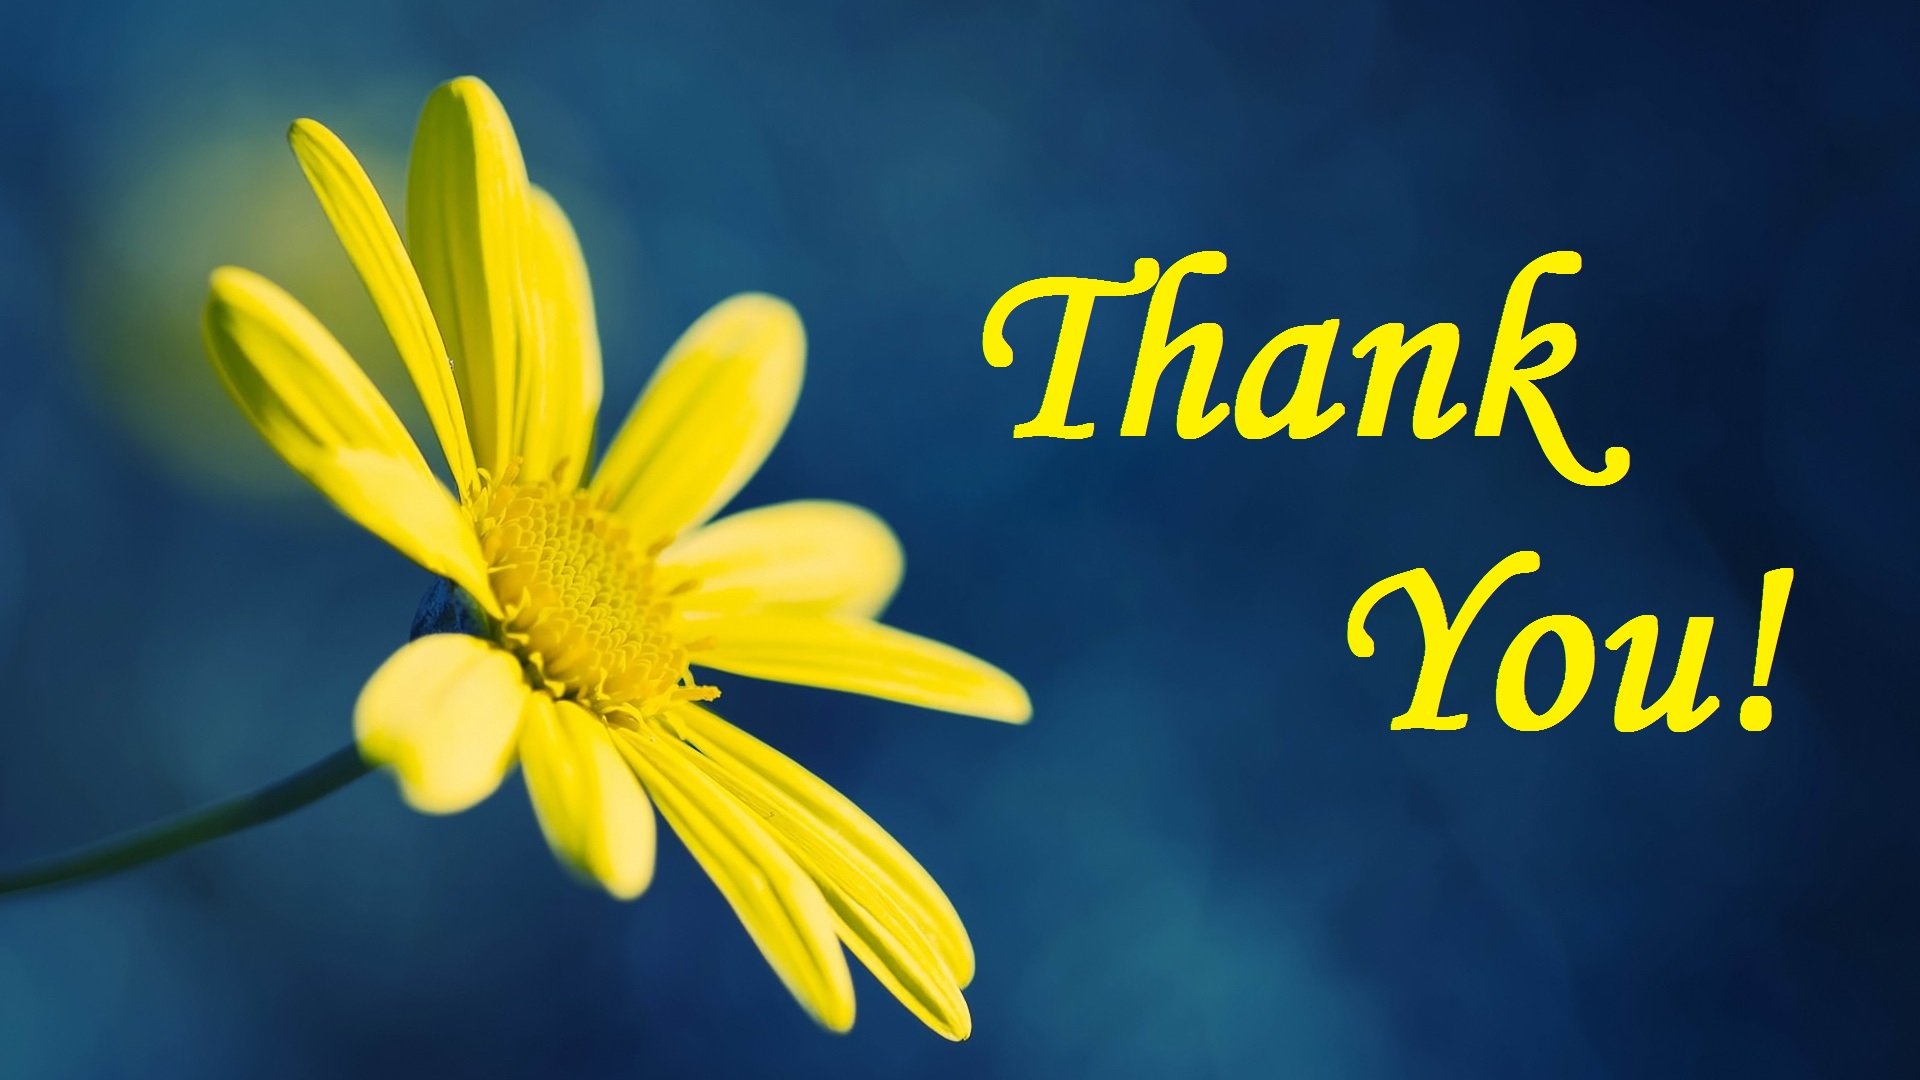 Thank You Images - Thank You Picture Hd - HD Wallpaper 